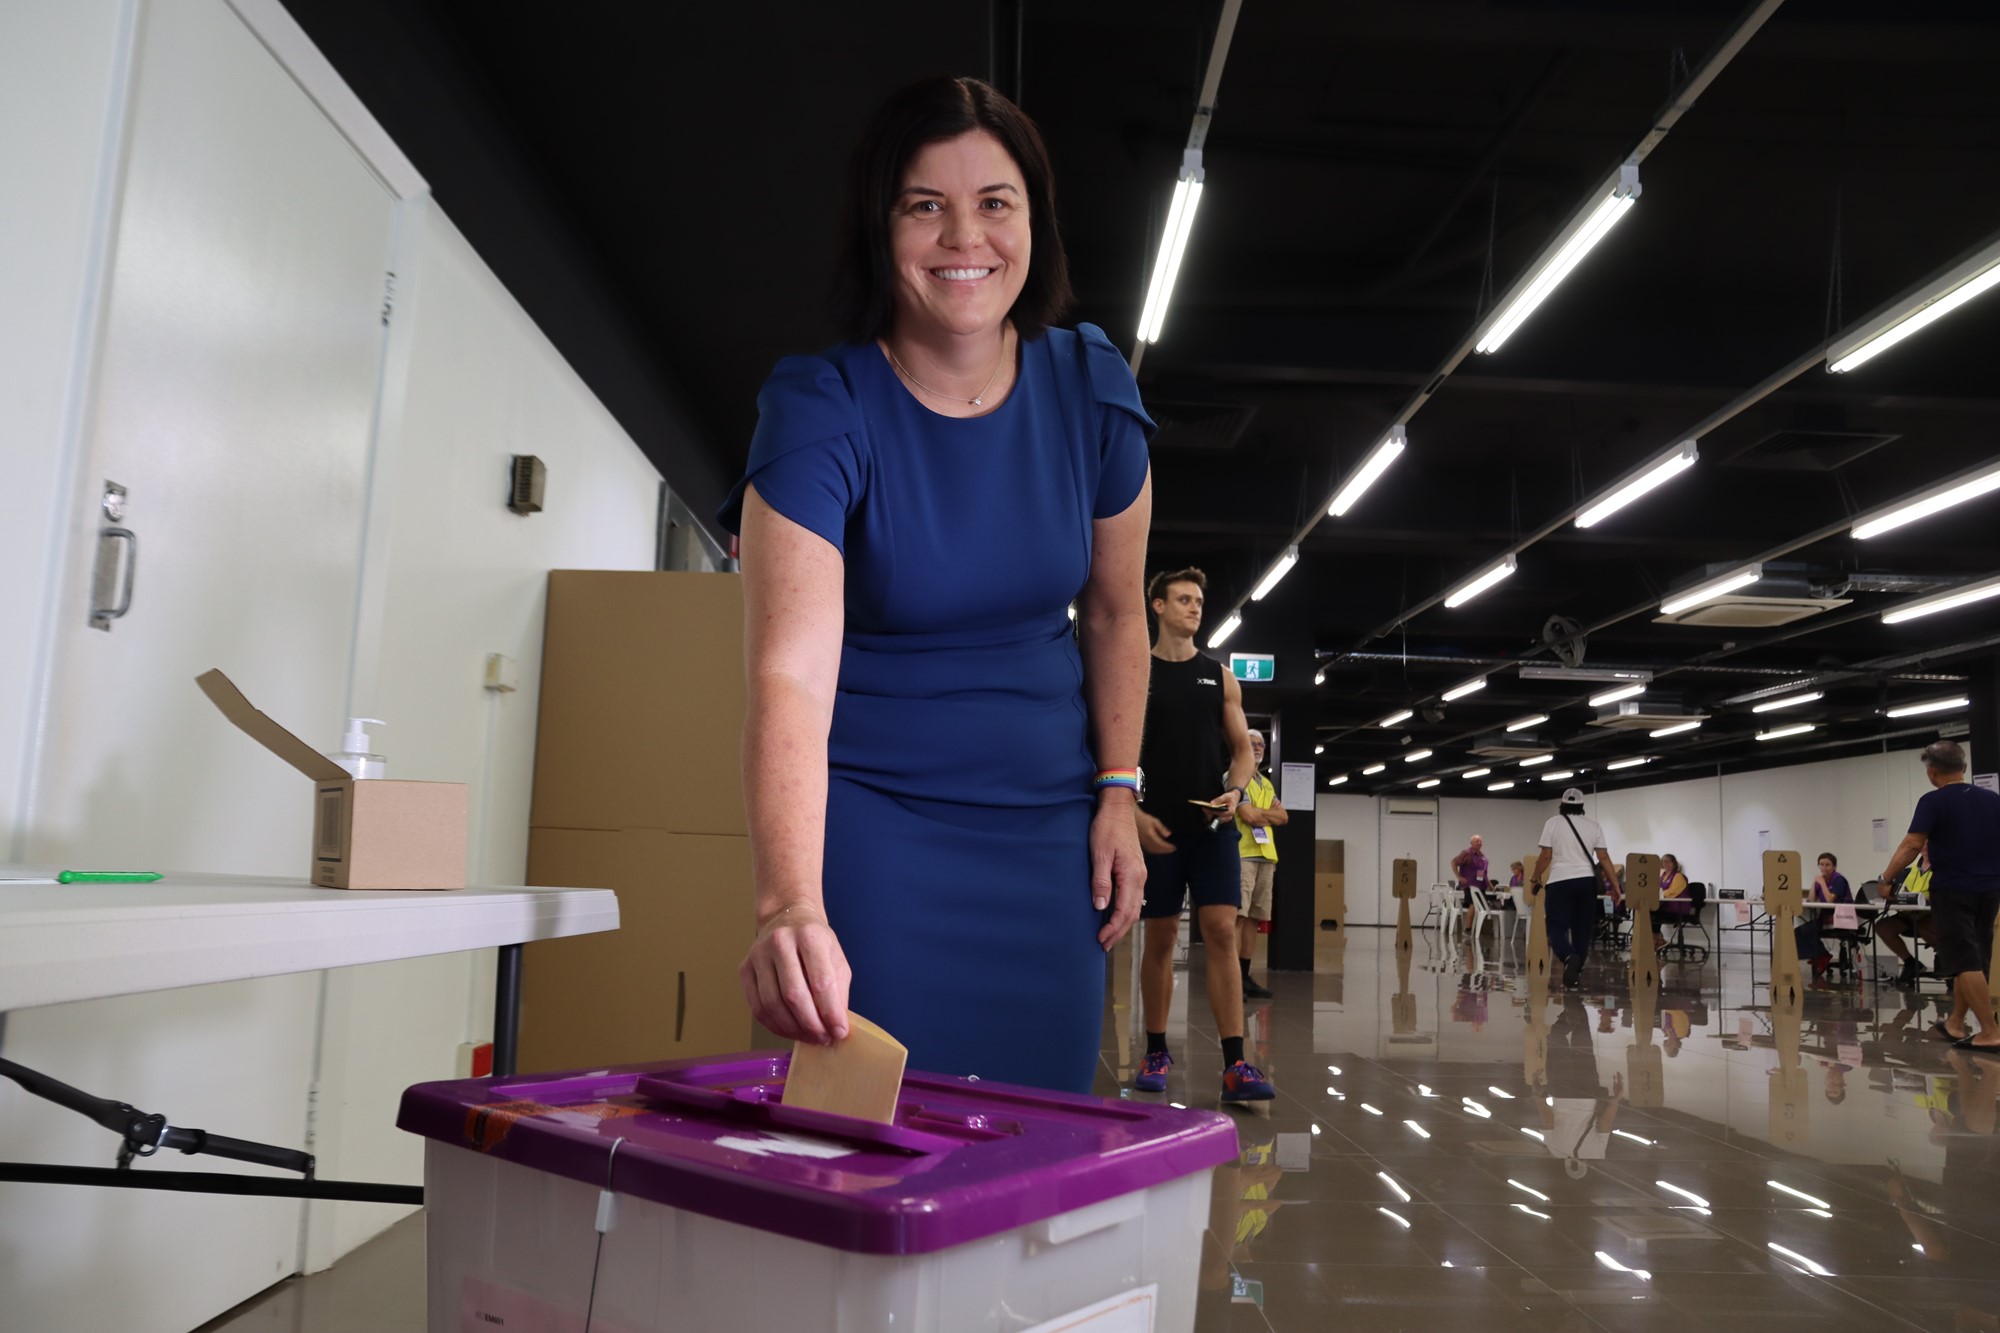 Natasha Fyles in a blue dress places a ballot in a box at a voting centre while smiling at the camera